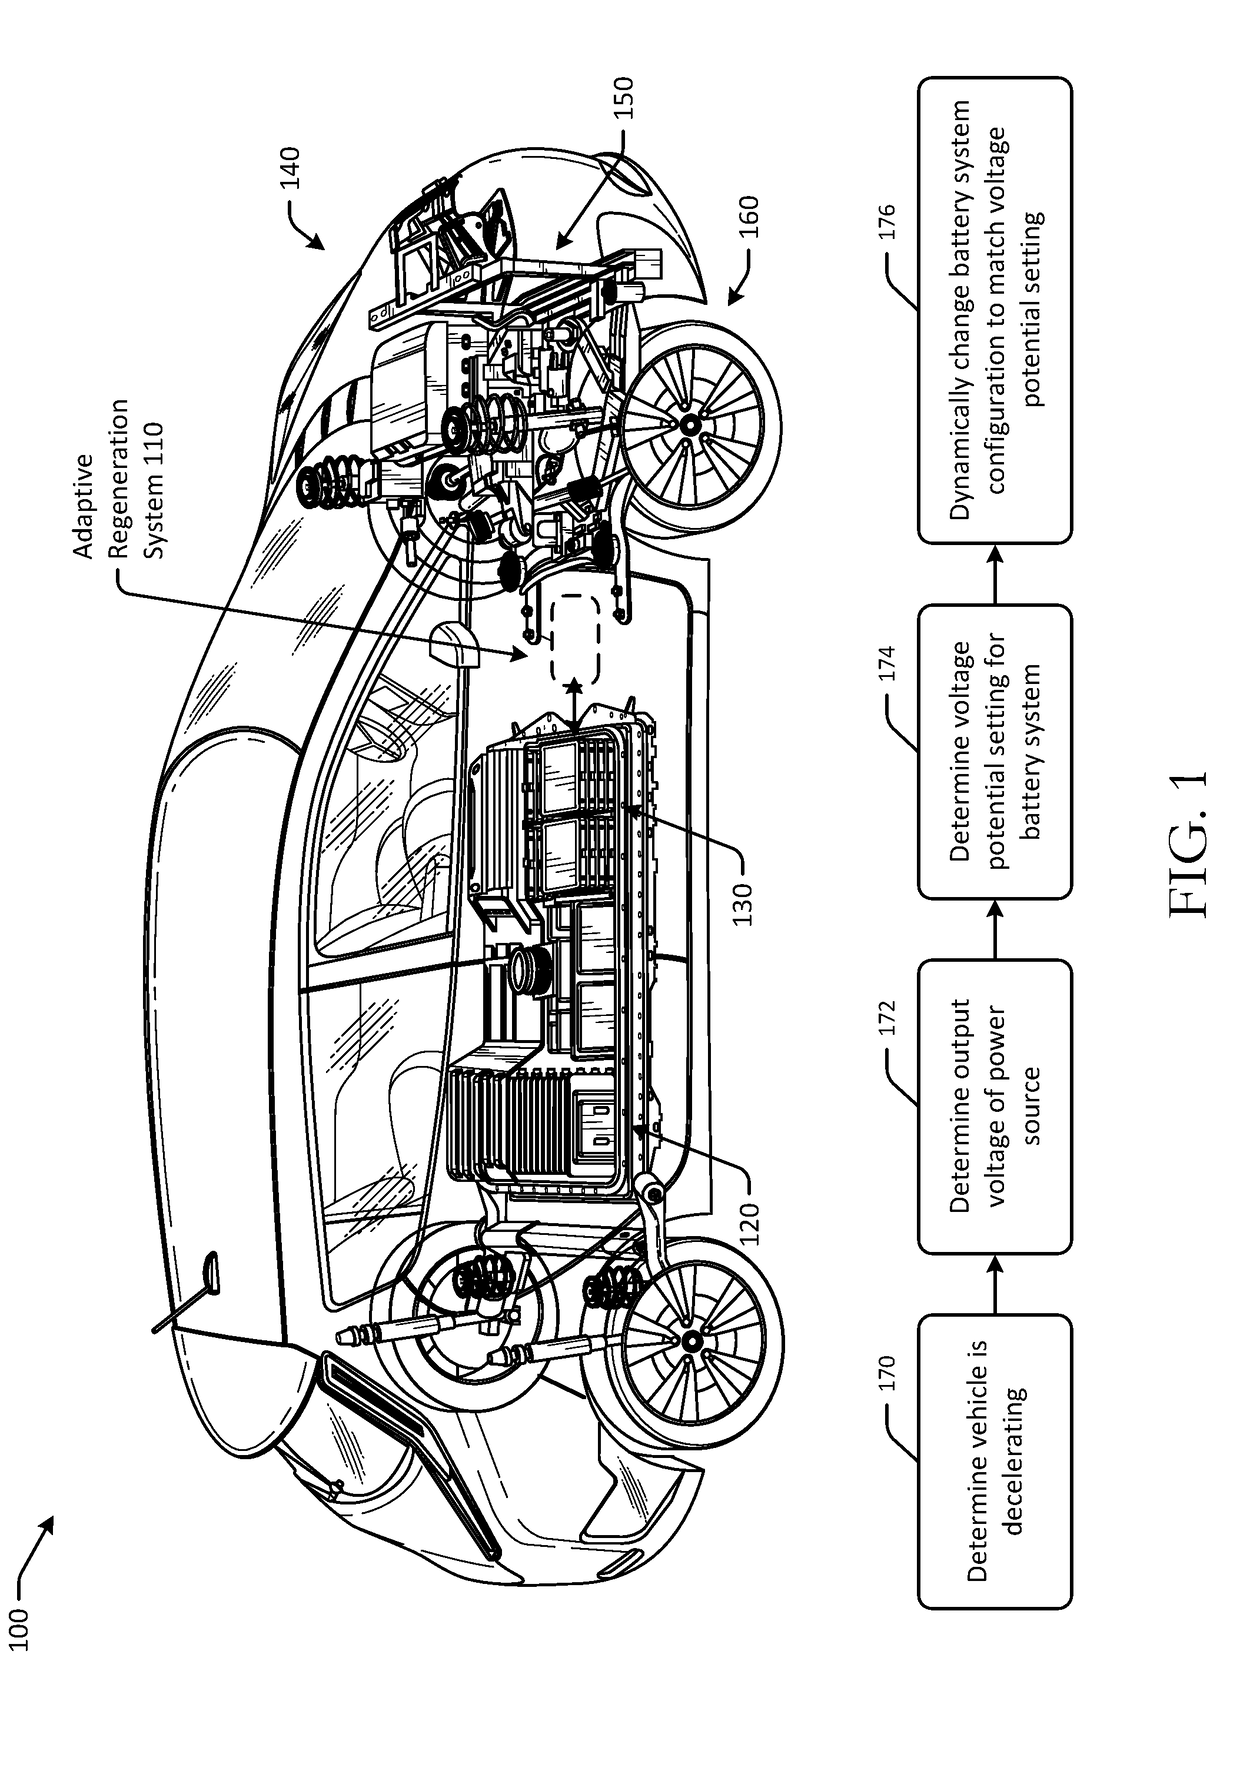 Adaptive regeneration systems for electric vehicles